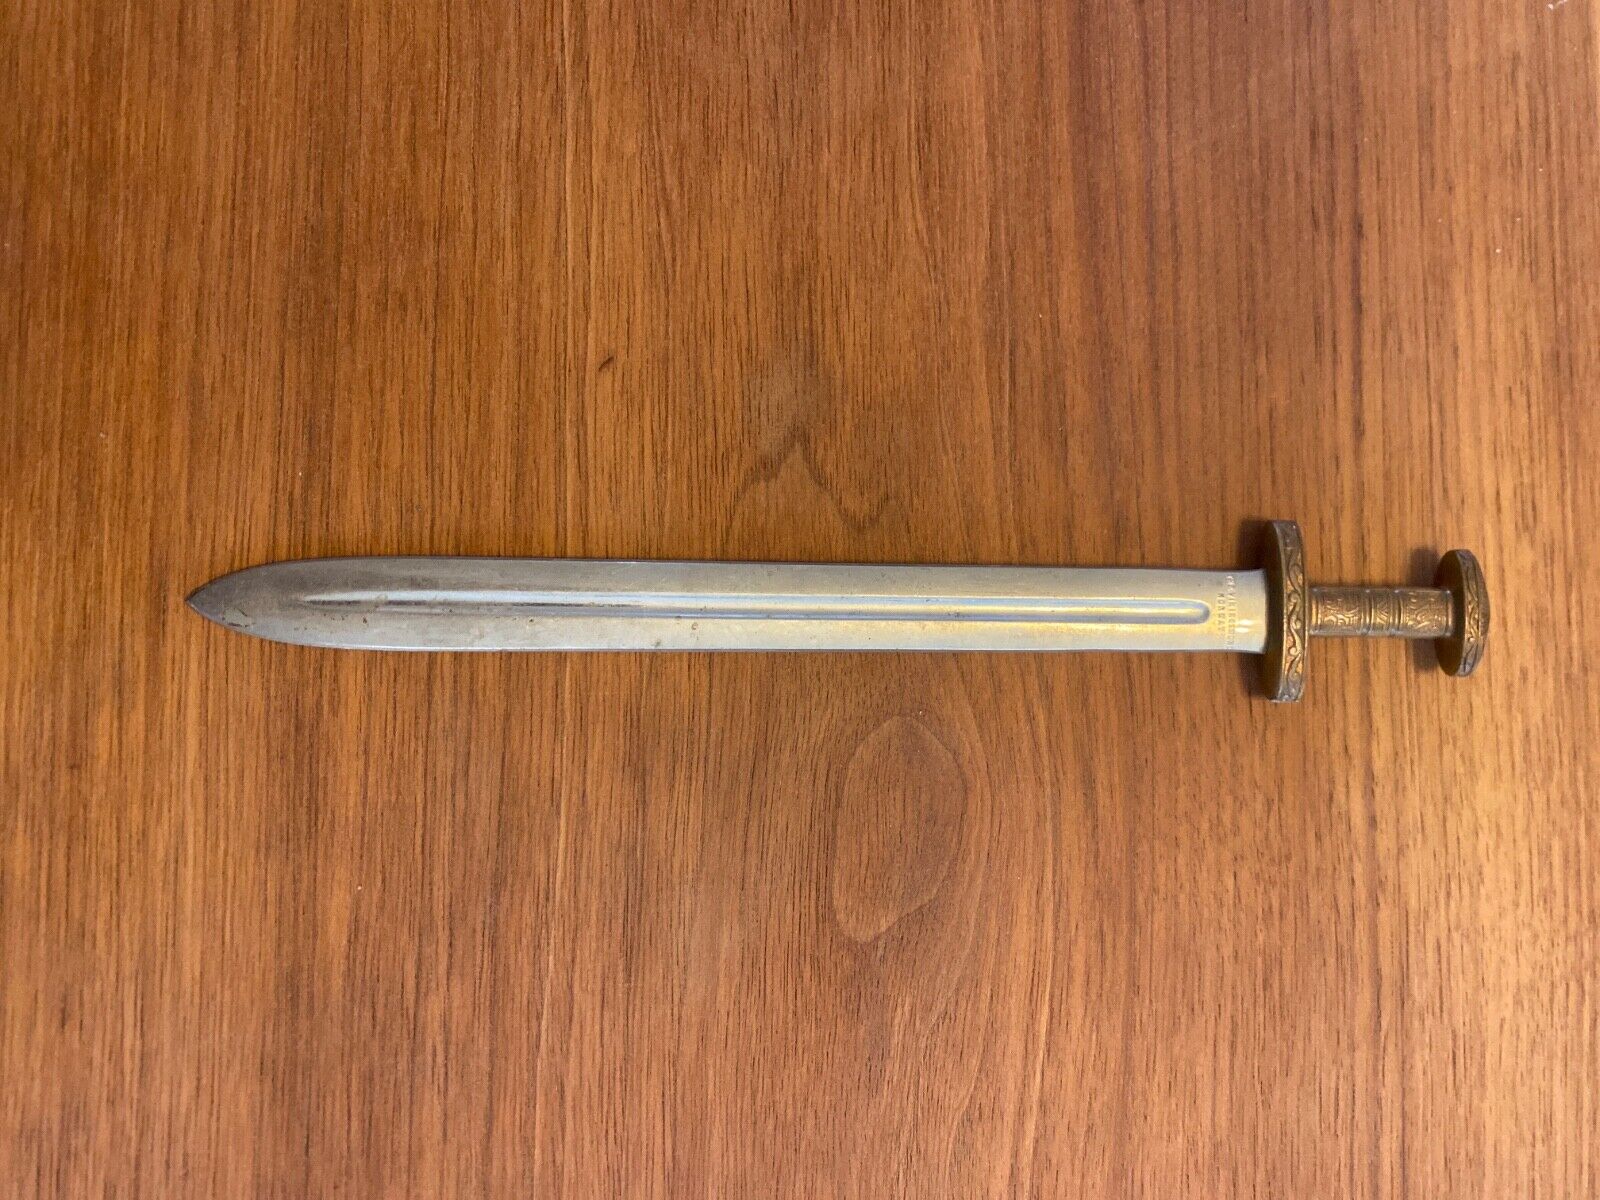 Vikingsword Norway. In great condition, no scratches on the body or handle. 